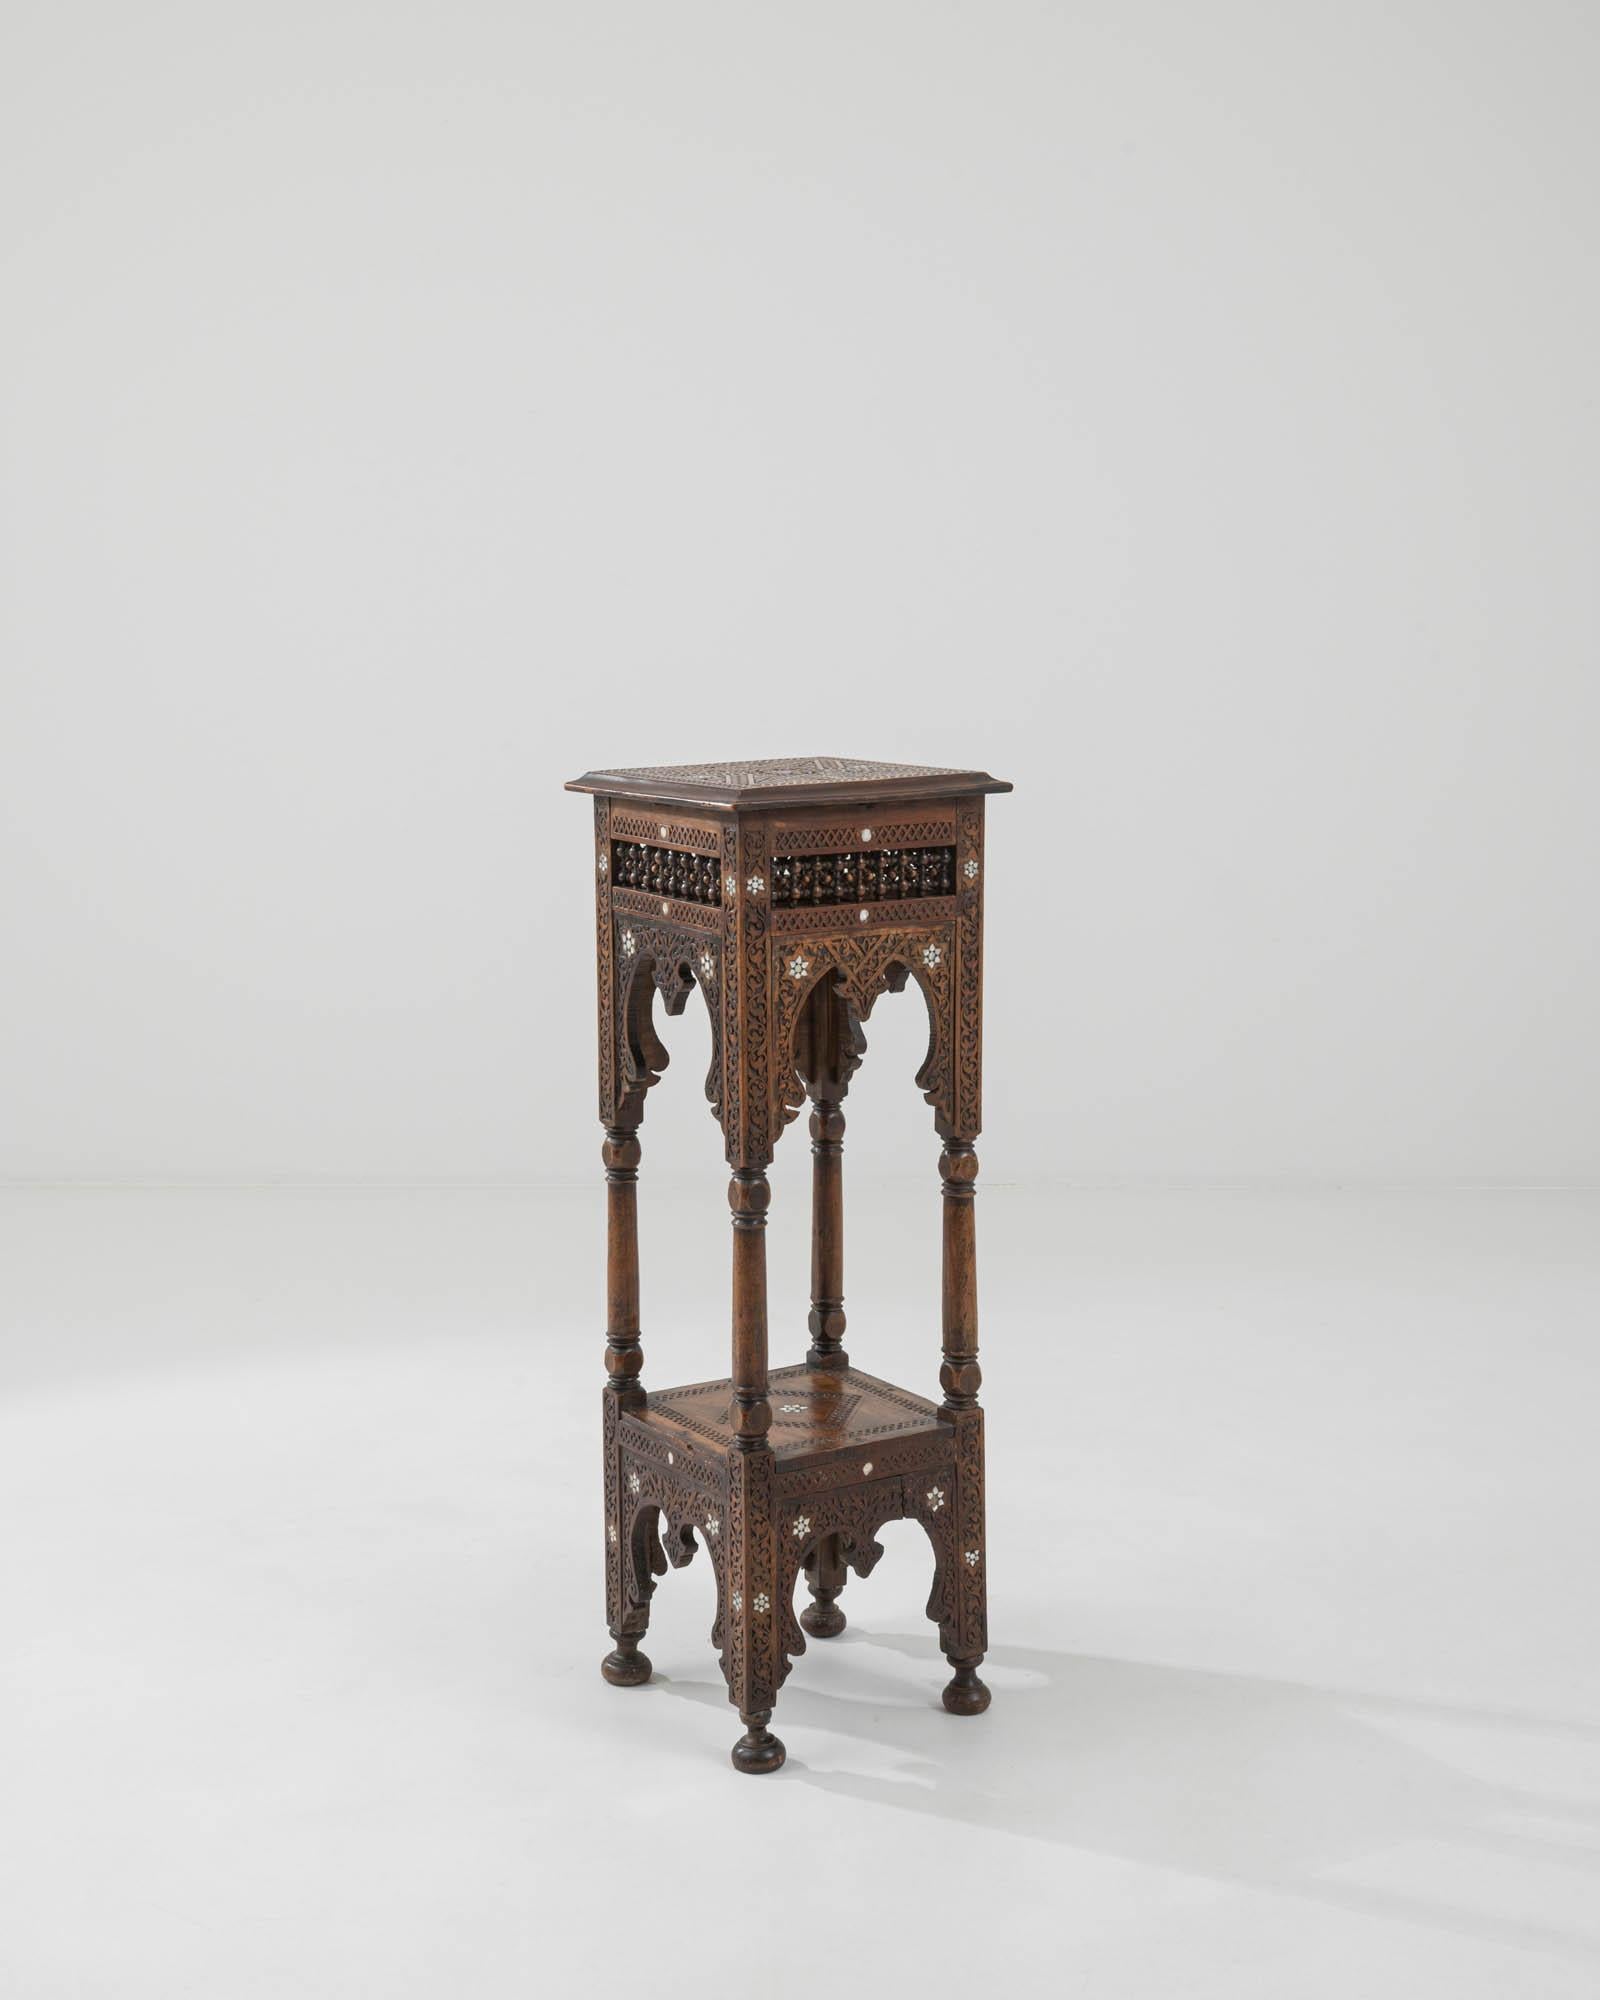 A wooden pedestal created in 20th century Syria. Characteristic of Arabic design, this lovely pedestal is painstakingly carved from head to toe in elaborately described geometric patterning, which make the entirety of the piece shimmer with unique